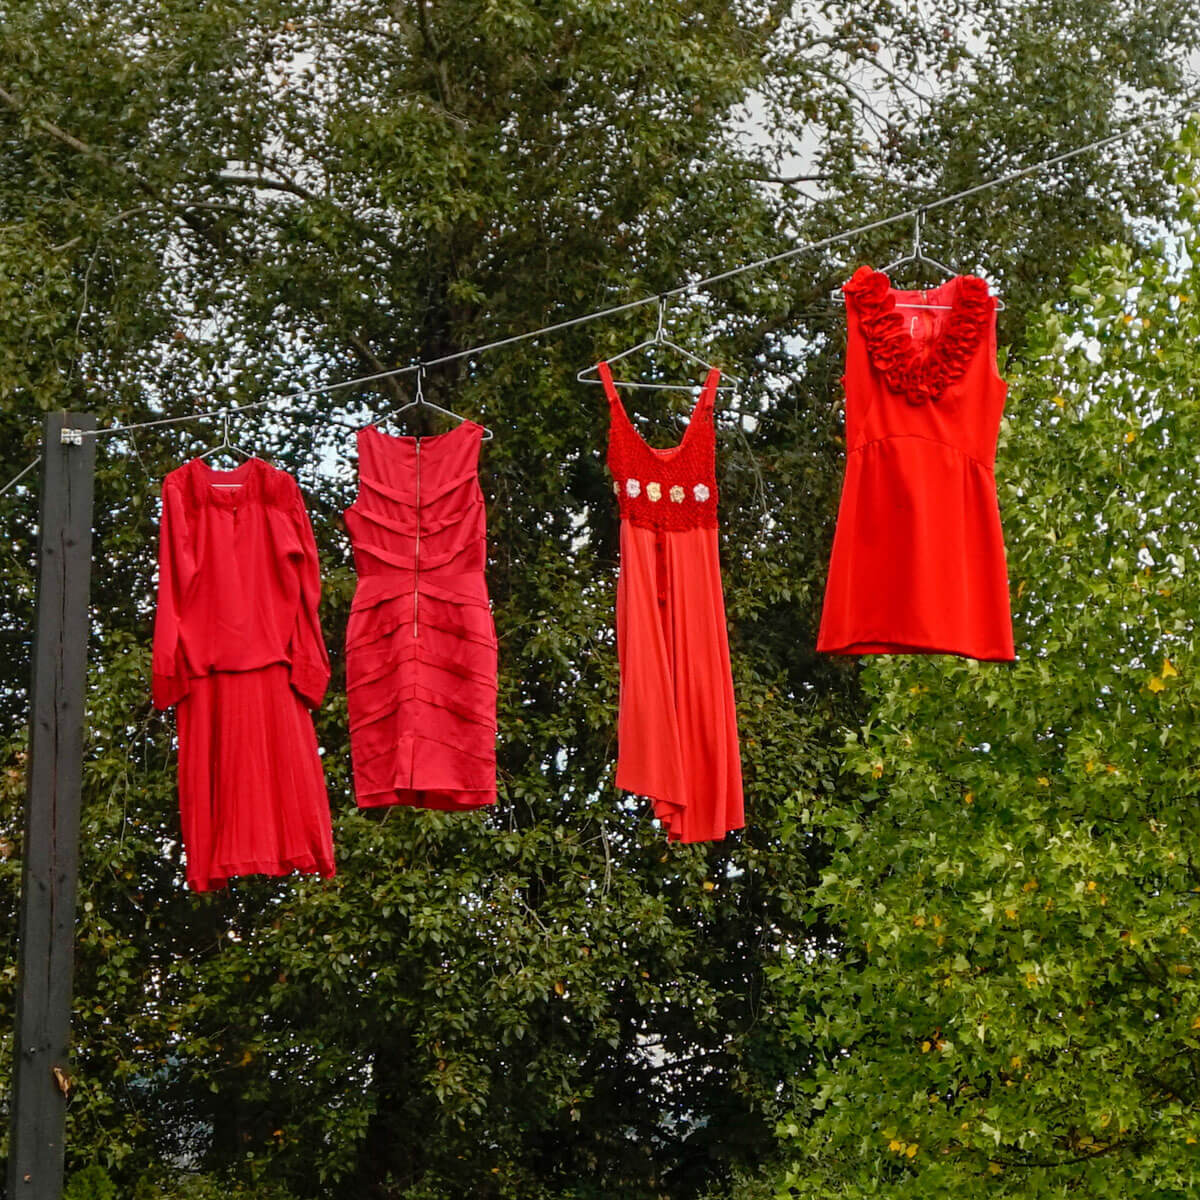 Four red dresses hanging on a clothesline